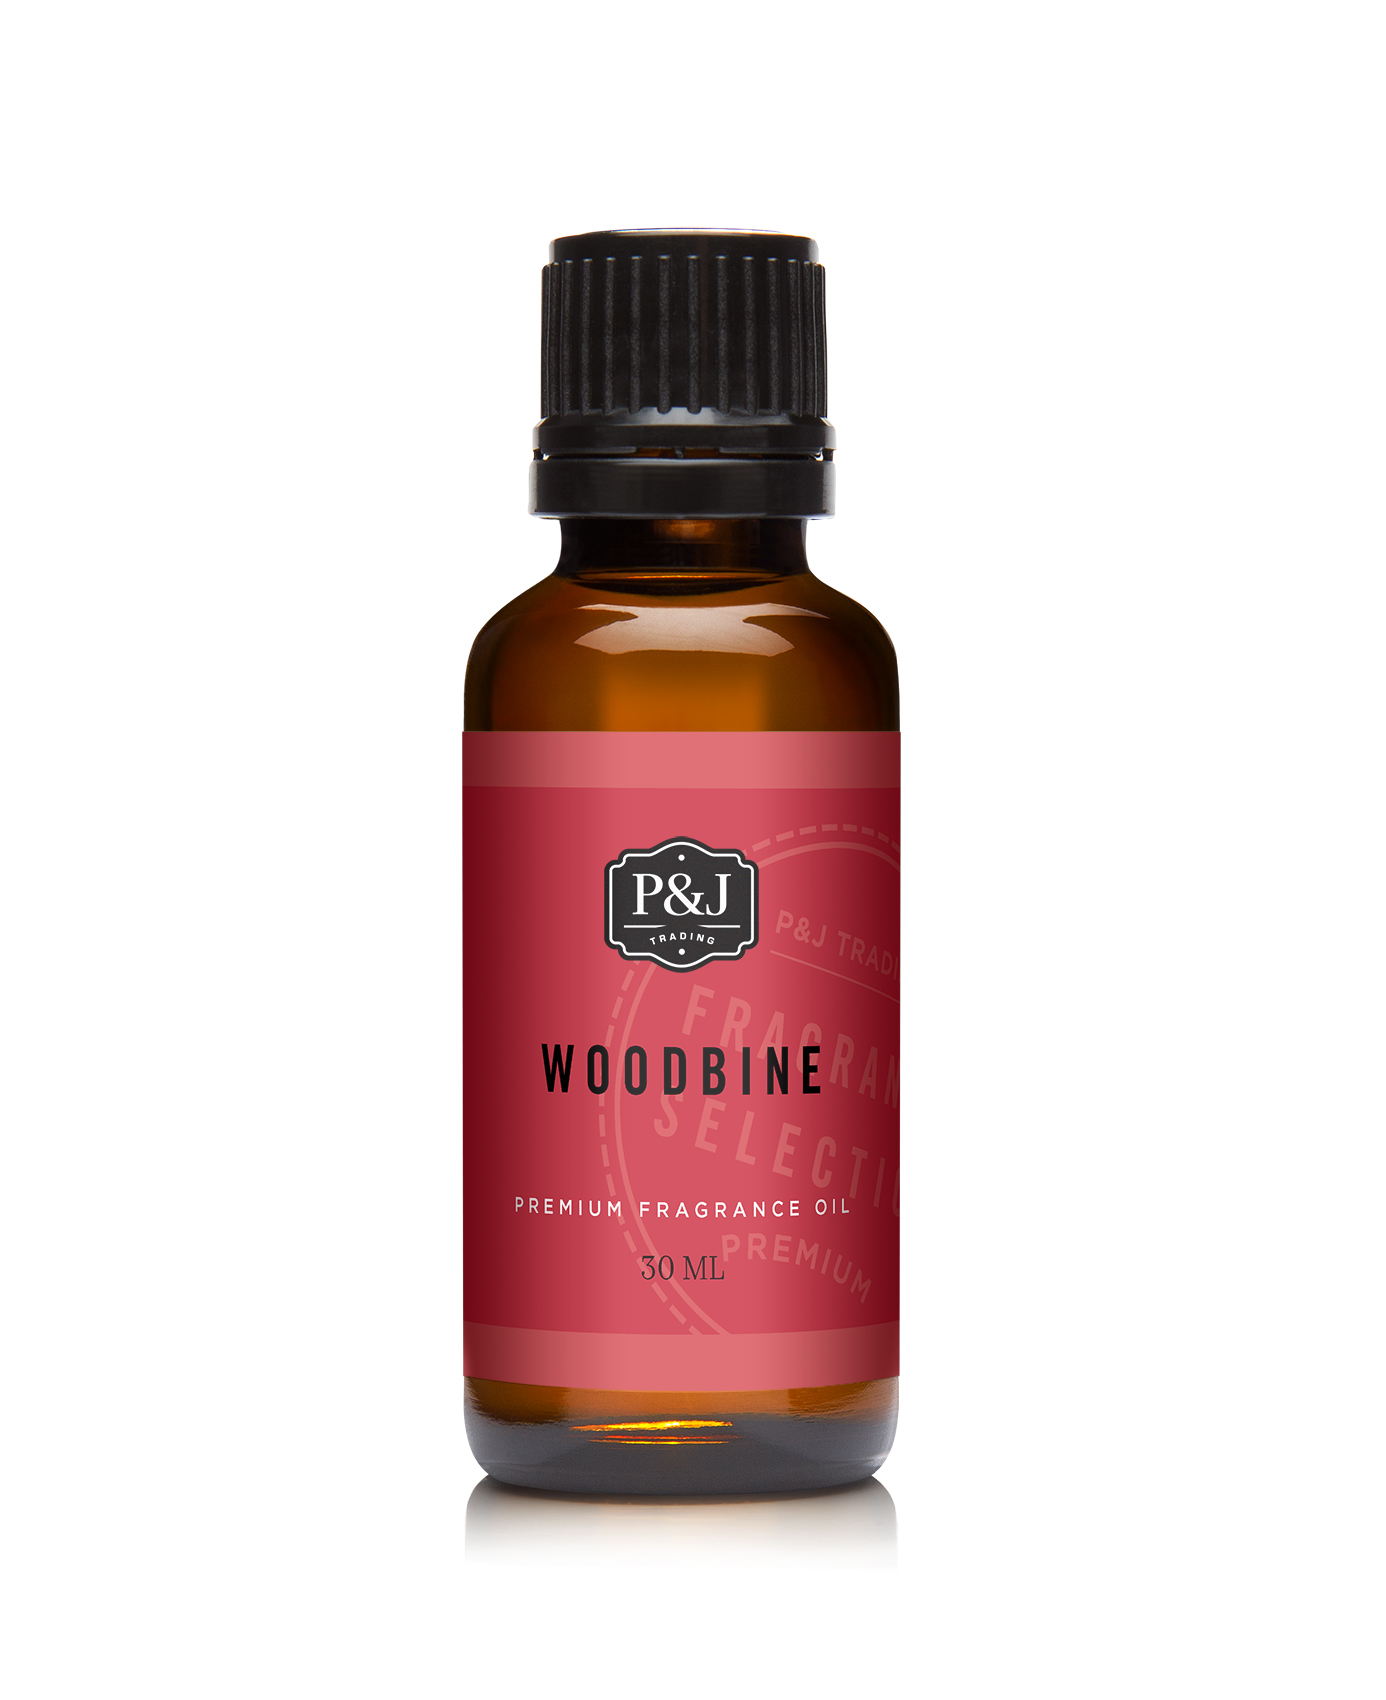 P&J Woodbine Premium Fragrance Oil for Candle Making & Soap Making,  Lotions, Haircare, Perfume, Diffuser Oils Scents - 30ml 